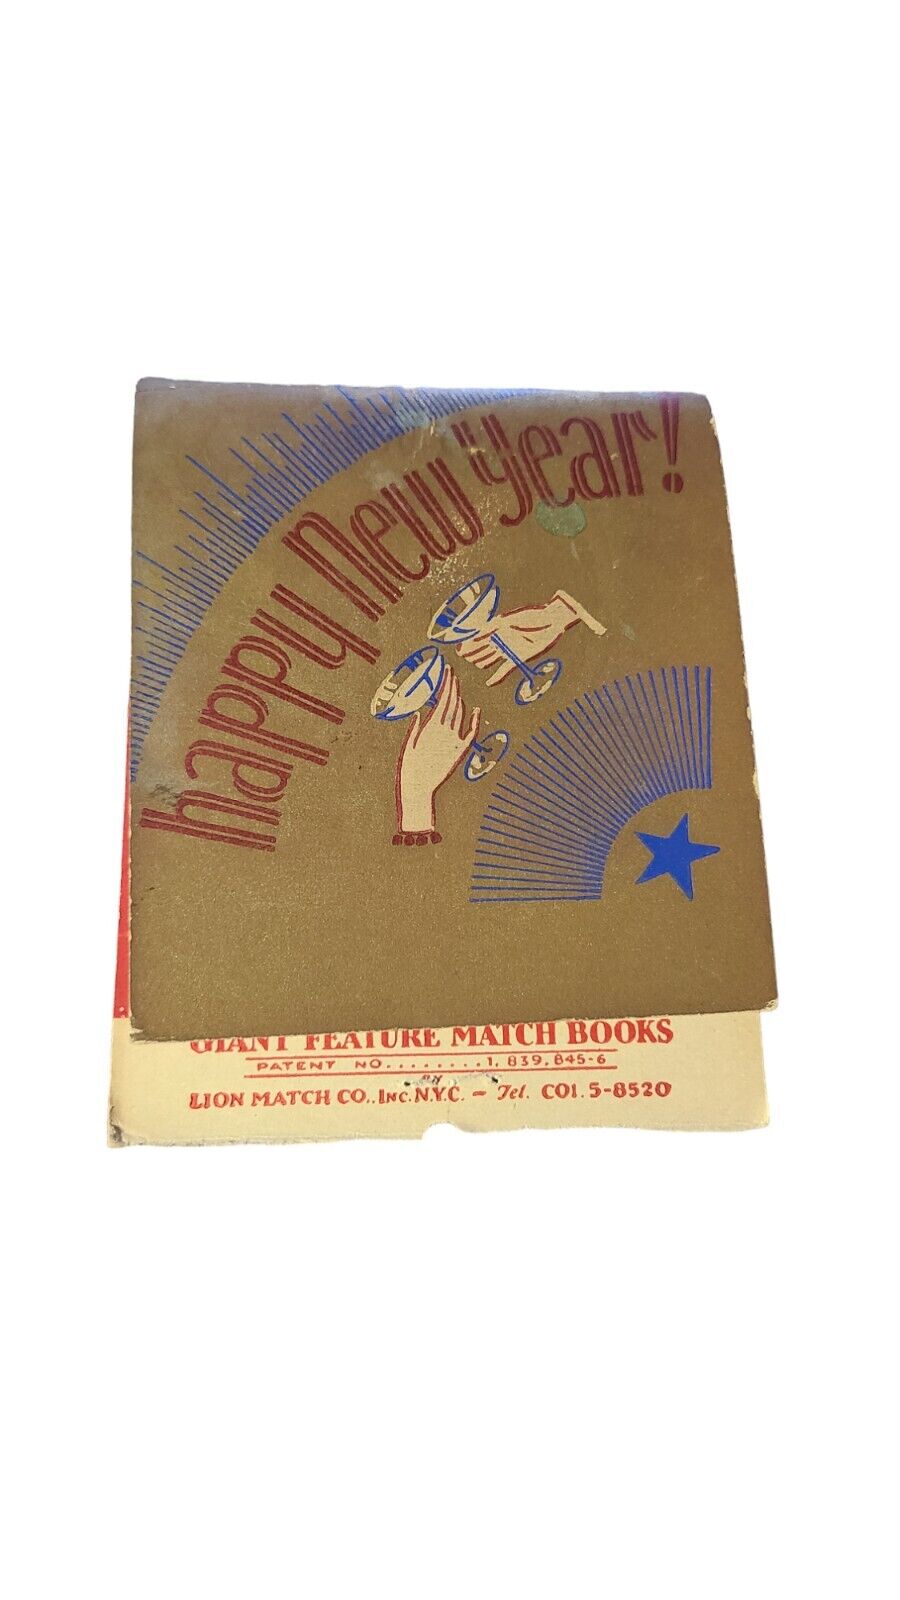 1936 Longchamps Restaurant NYC Vintage Matchbook Cover New Year's 